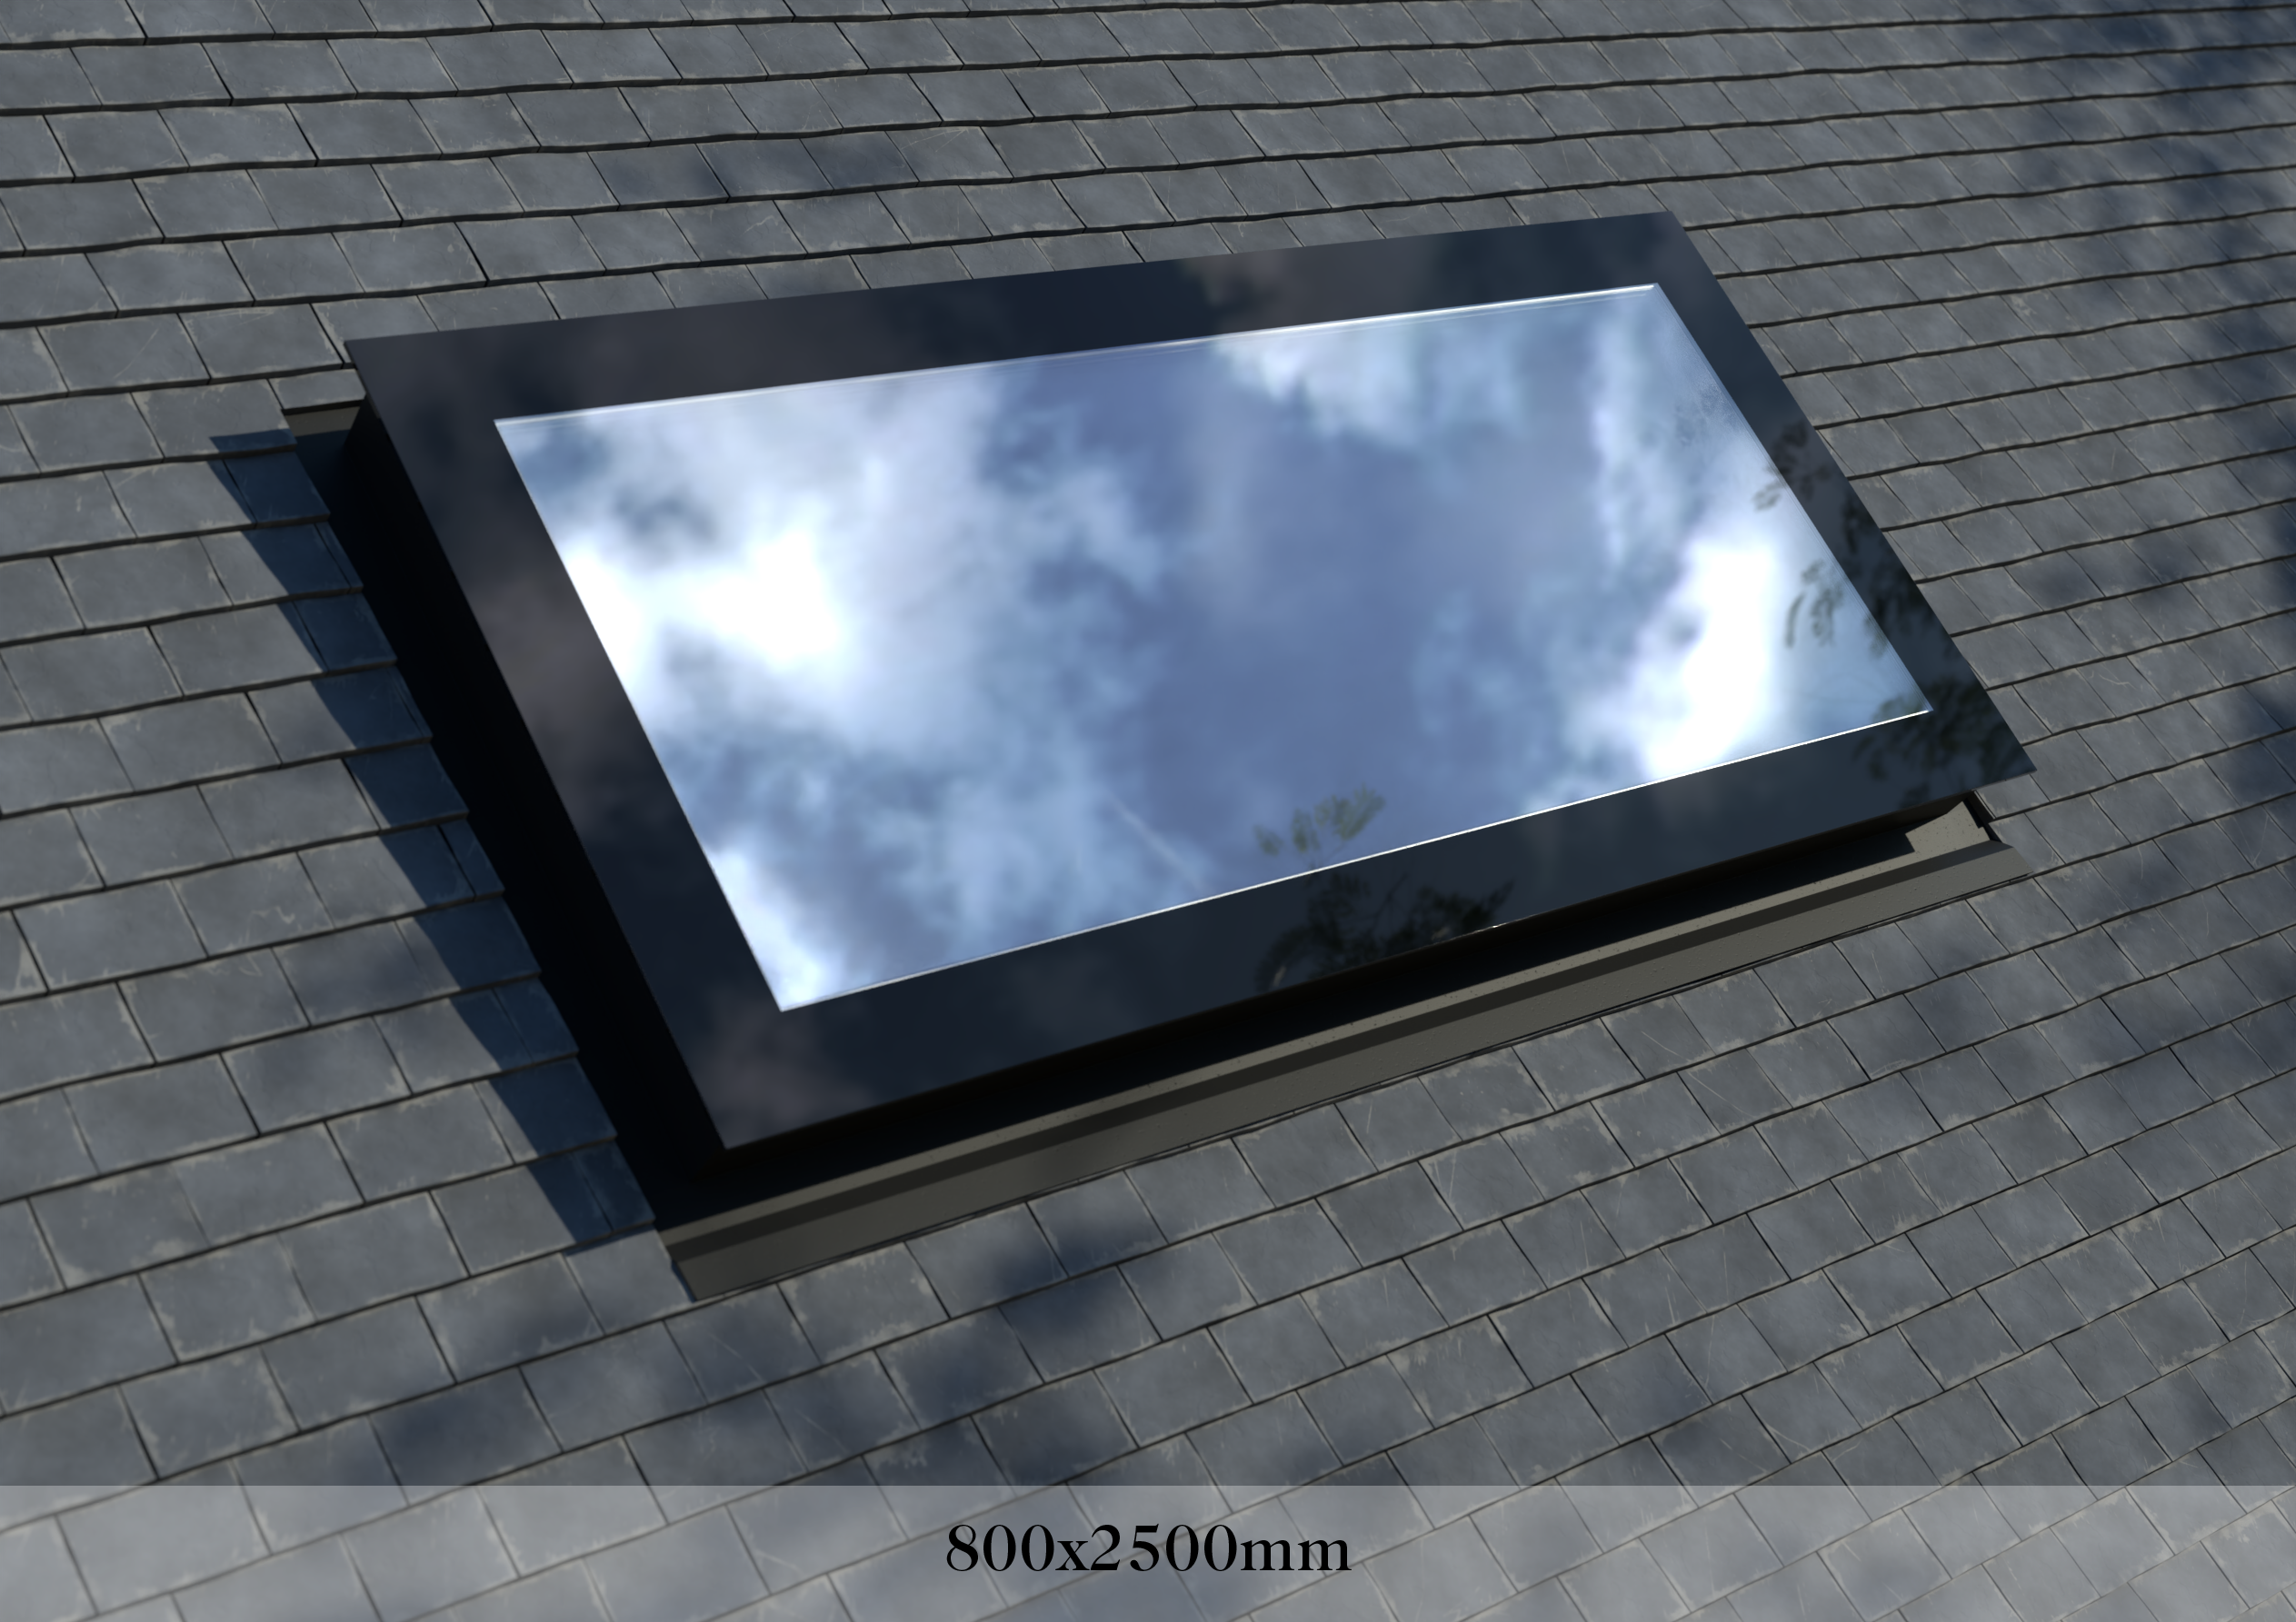 Pitched Roof Skylight 800 x 2500mm